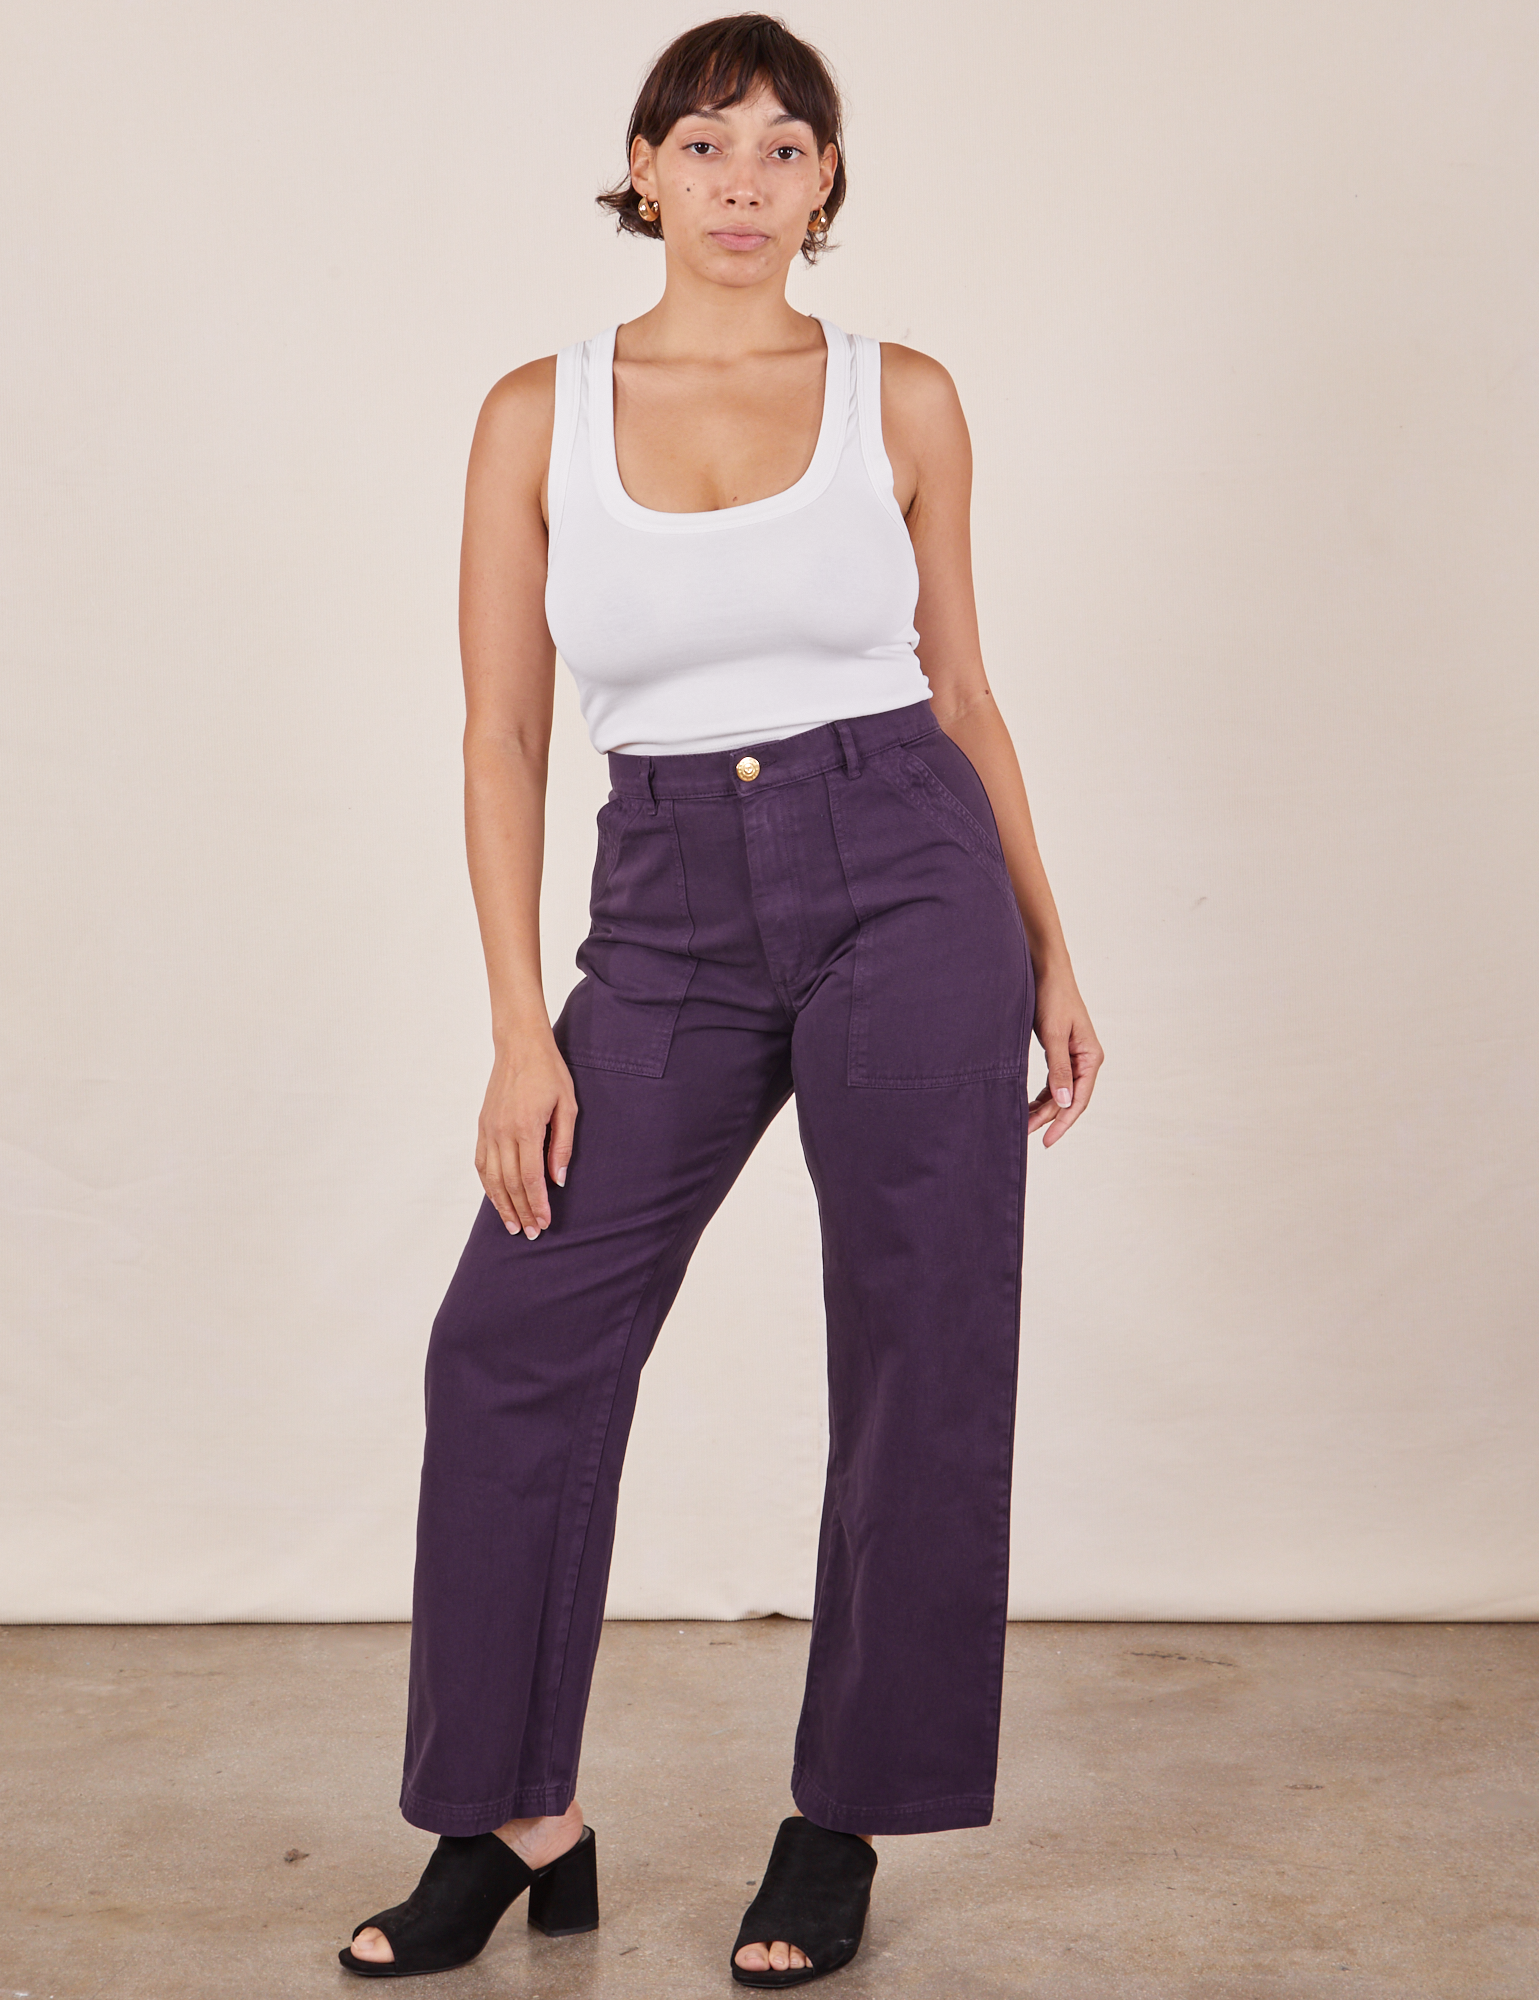 Tiara is 5&#39;4&quot; and wearing S Work Pants in Nebula Purple paired with Cropped Tank Top in vintage tee off-white